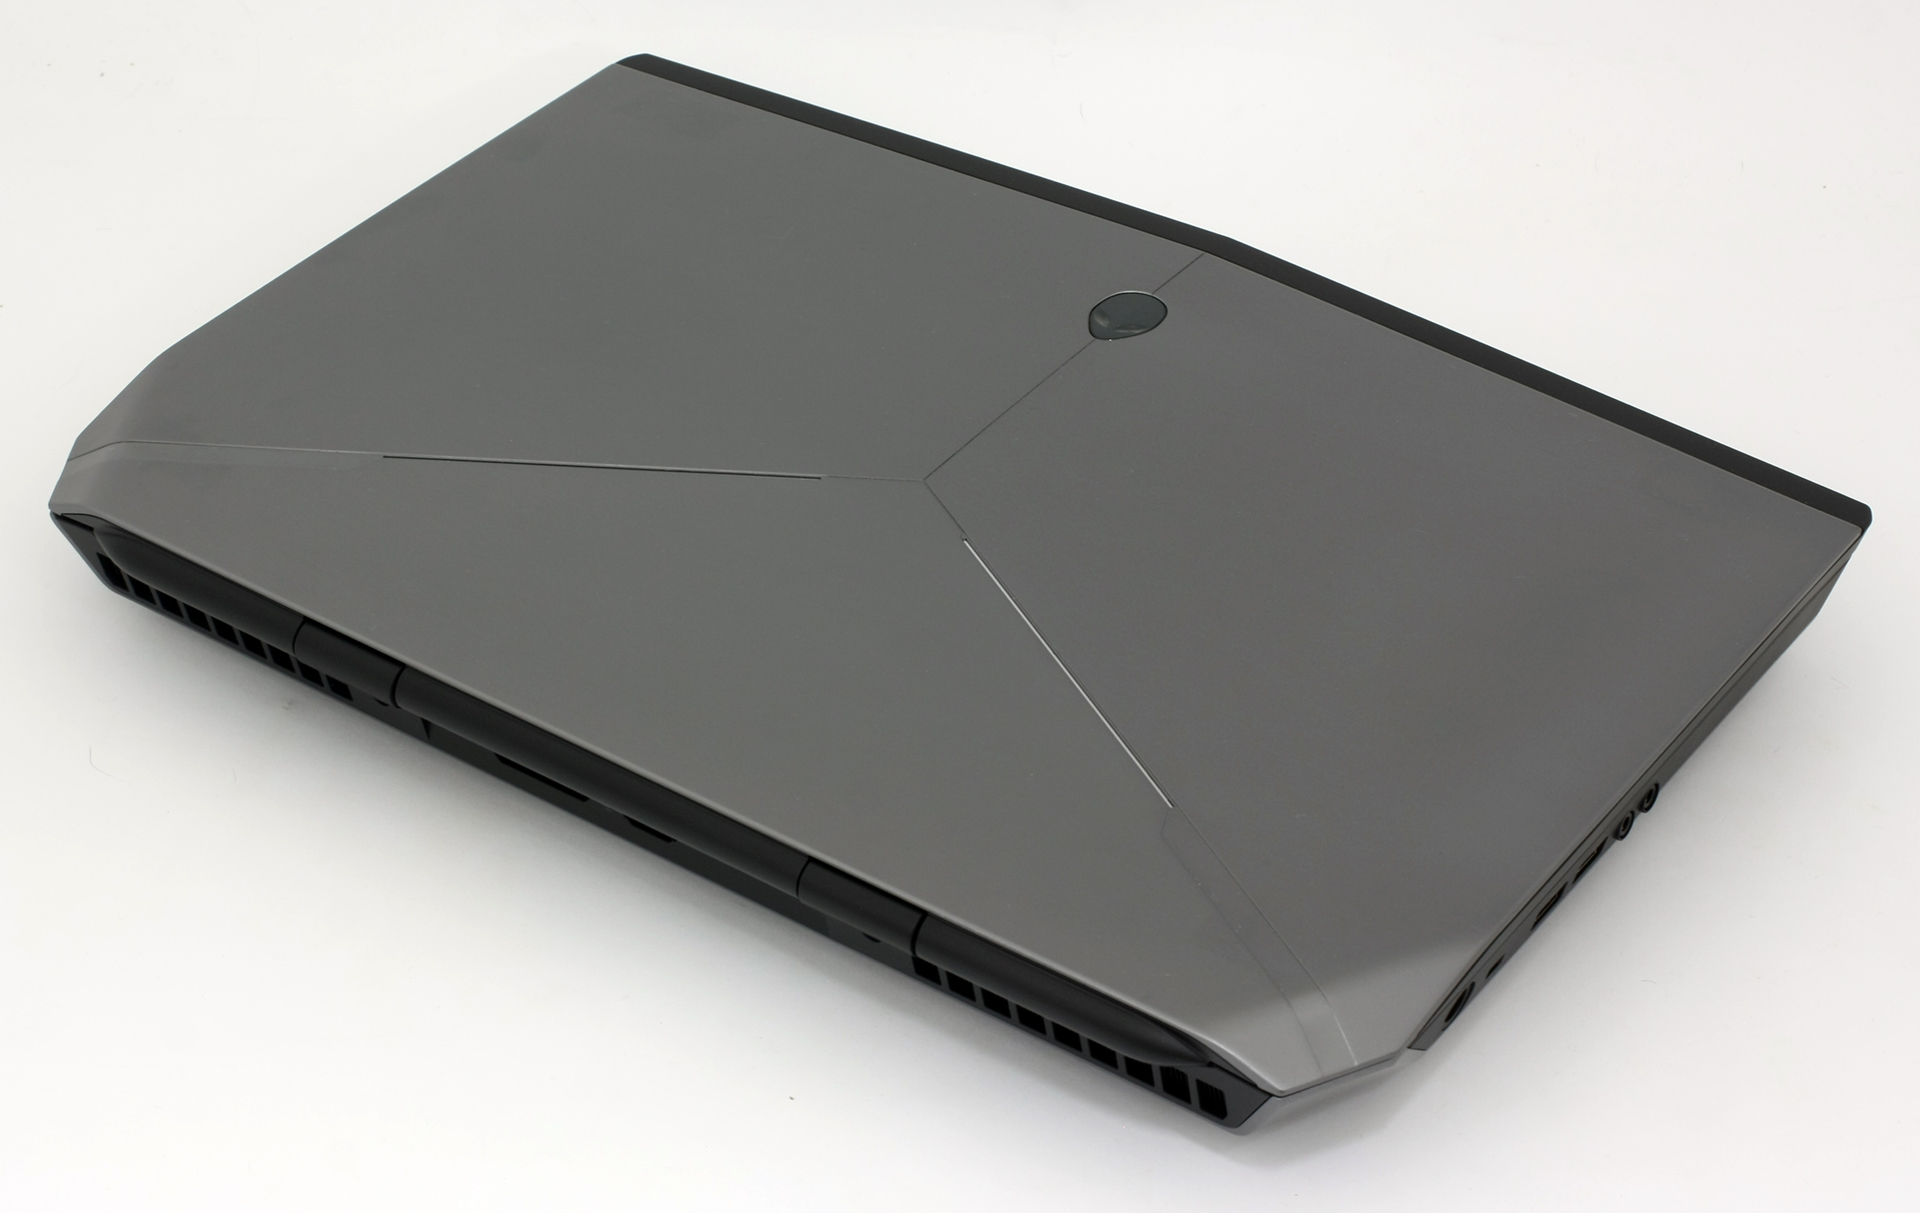 Alienware 15 (R2, Late 2015) review - pushing the boundaries of 